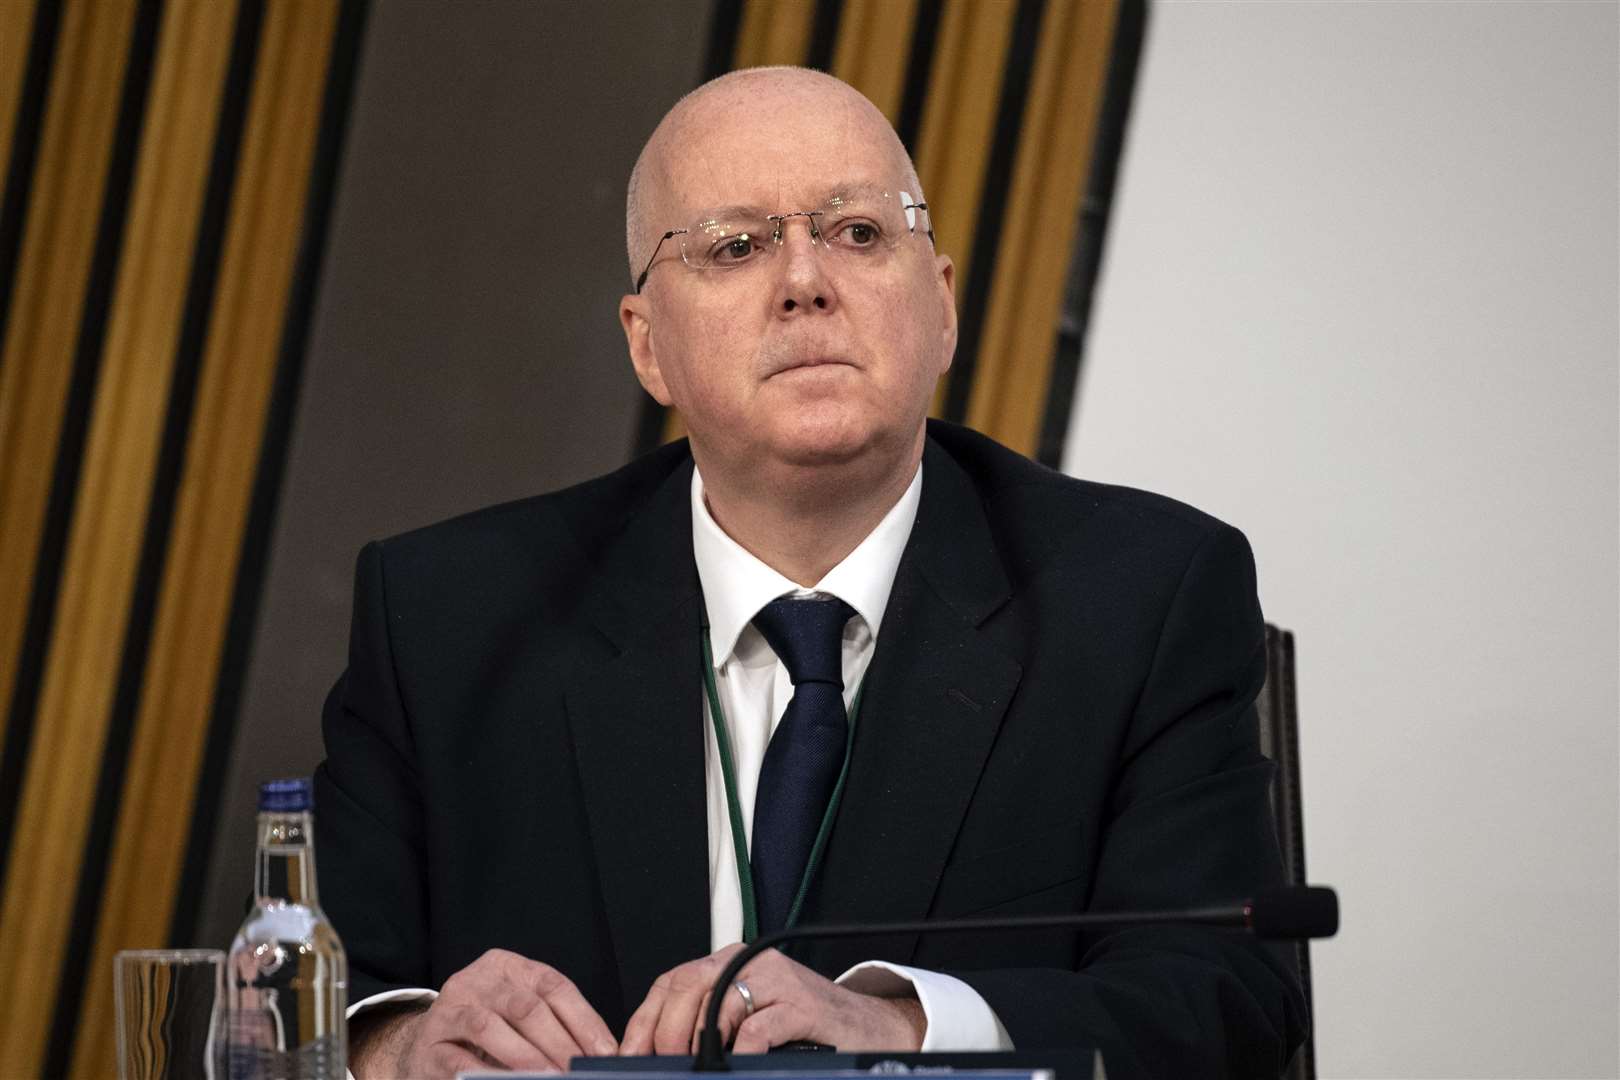 Peter Murrell was arrested in April 2023 as part of the ongoing investigation into the SNP’s finances (Andy Buchanan/PA)